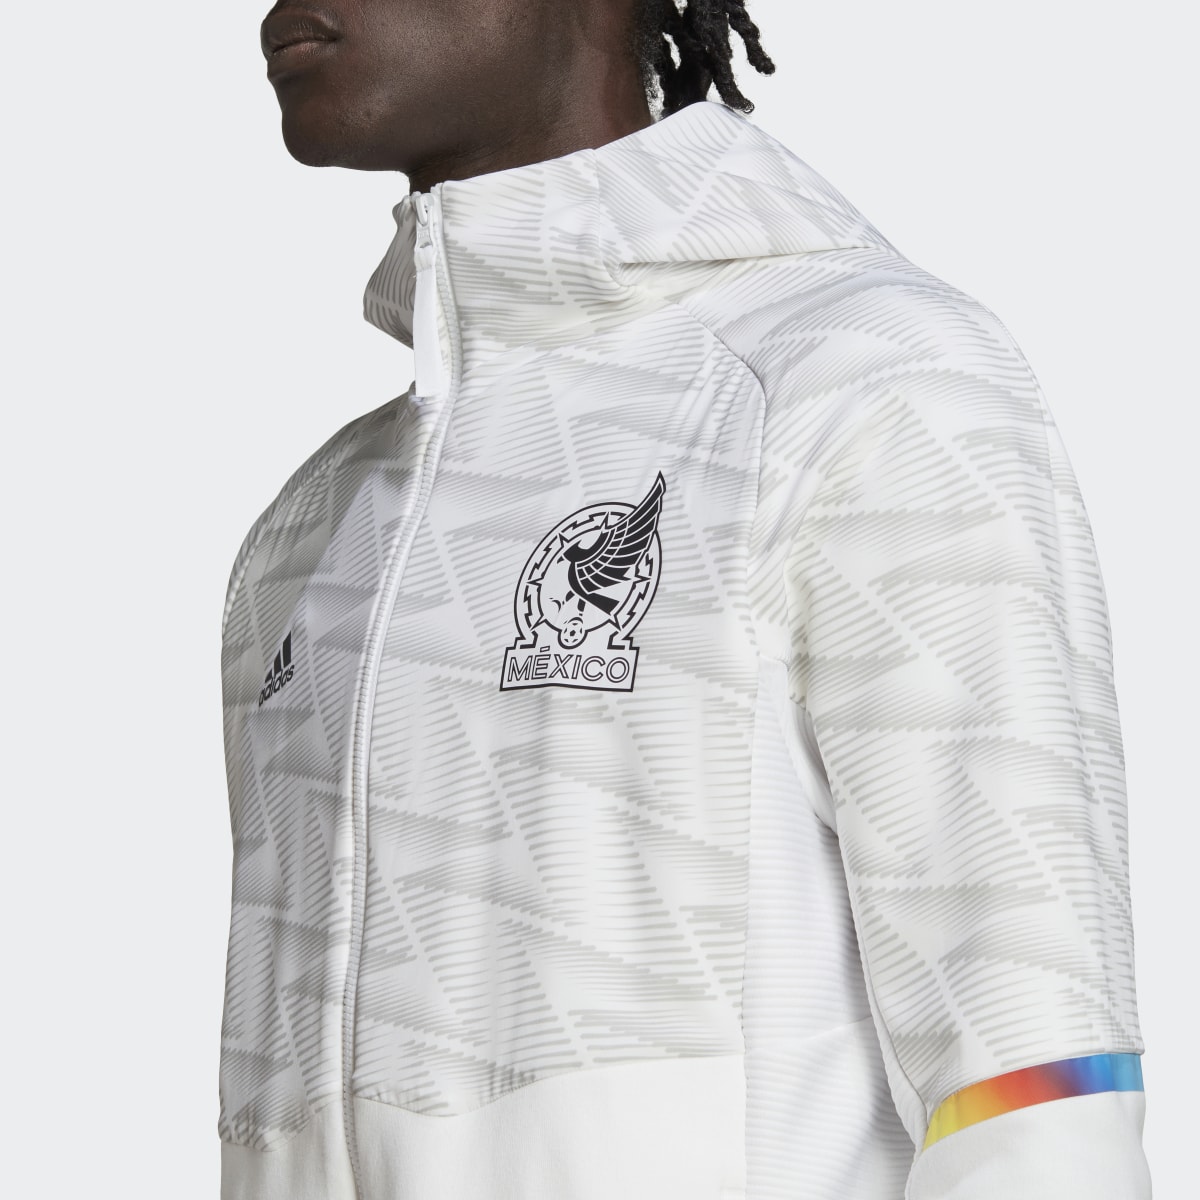 Adidas Mexico Game Day Full-Zip Travel Hoodie. 7